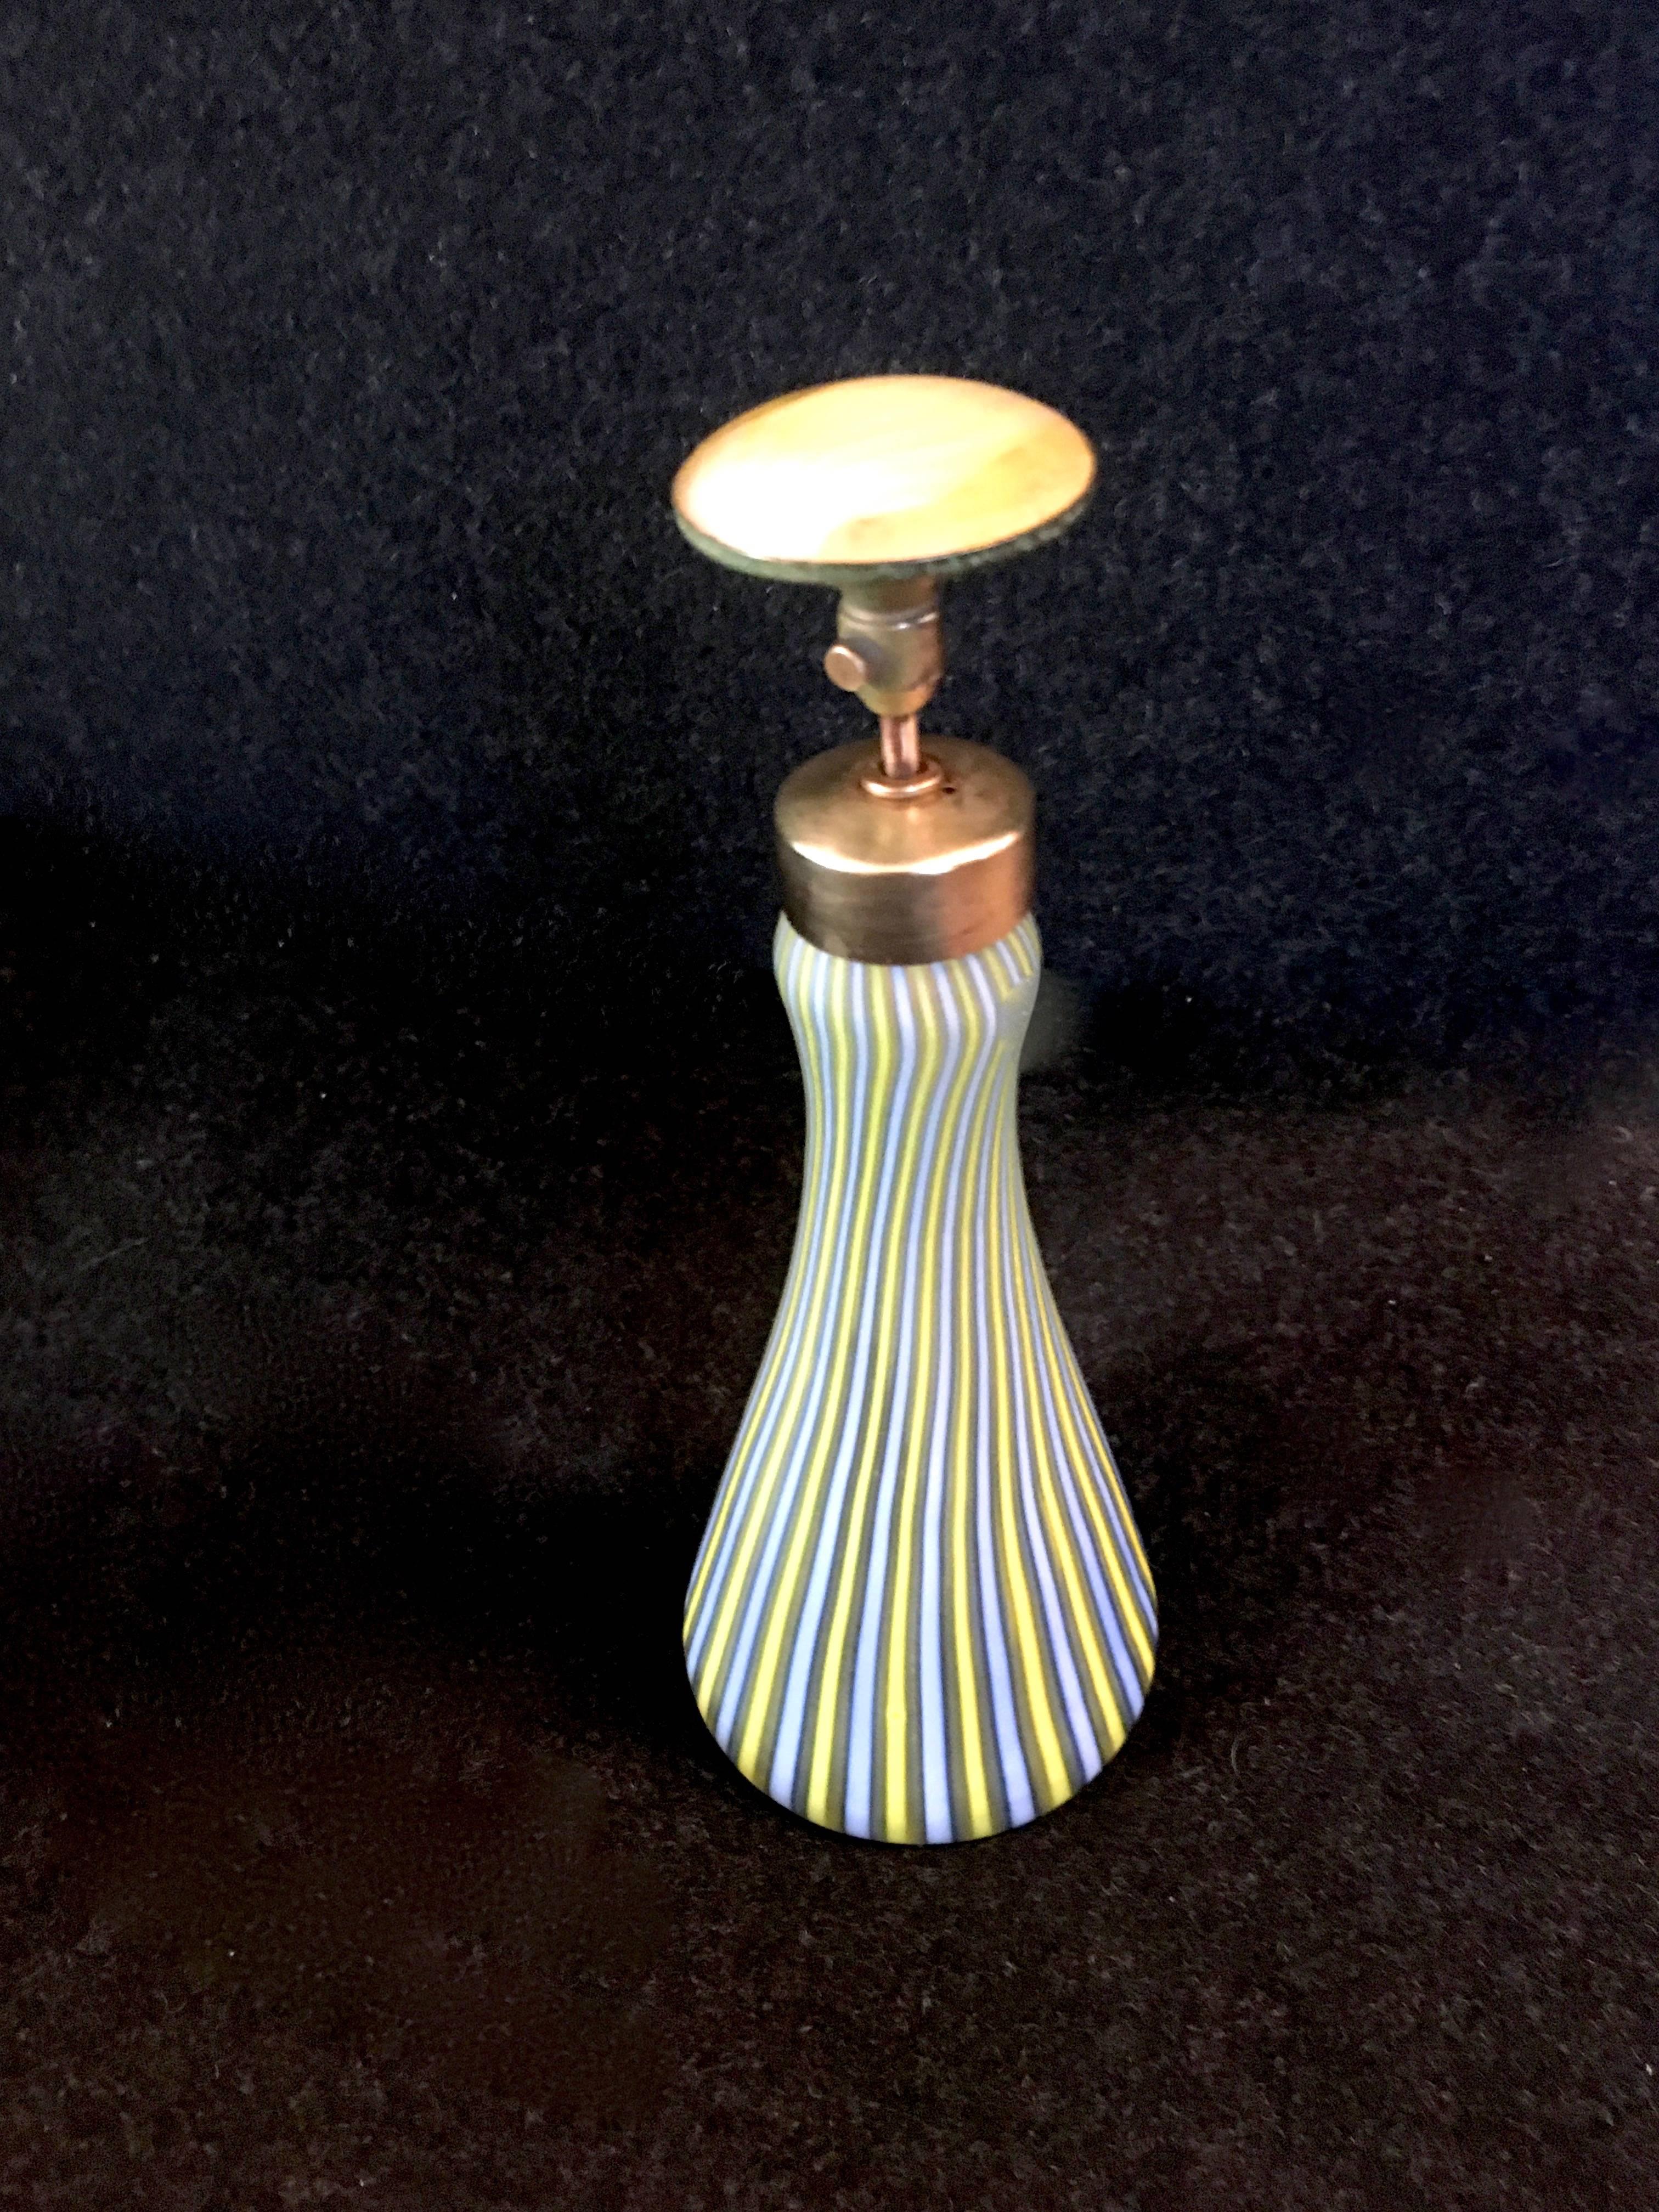 Italian Murano glass perfume bottle / atomizer

Blue / yellow blown glass Murano, colorful and ideal for the vanity or dresser.